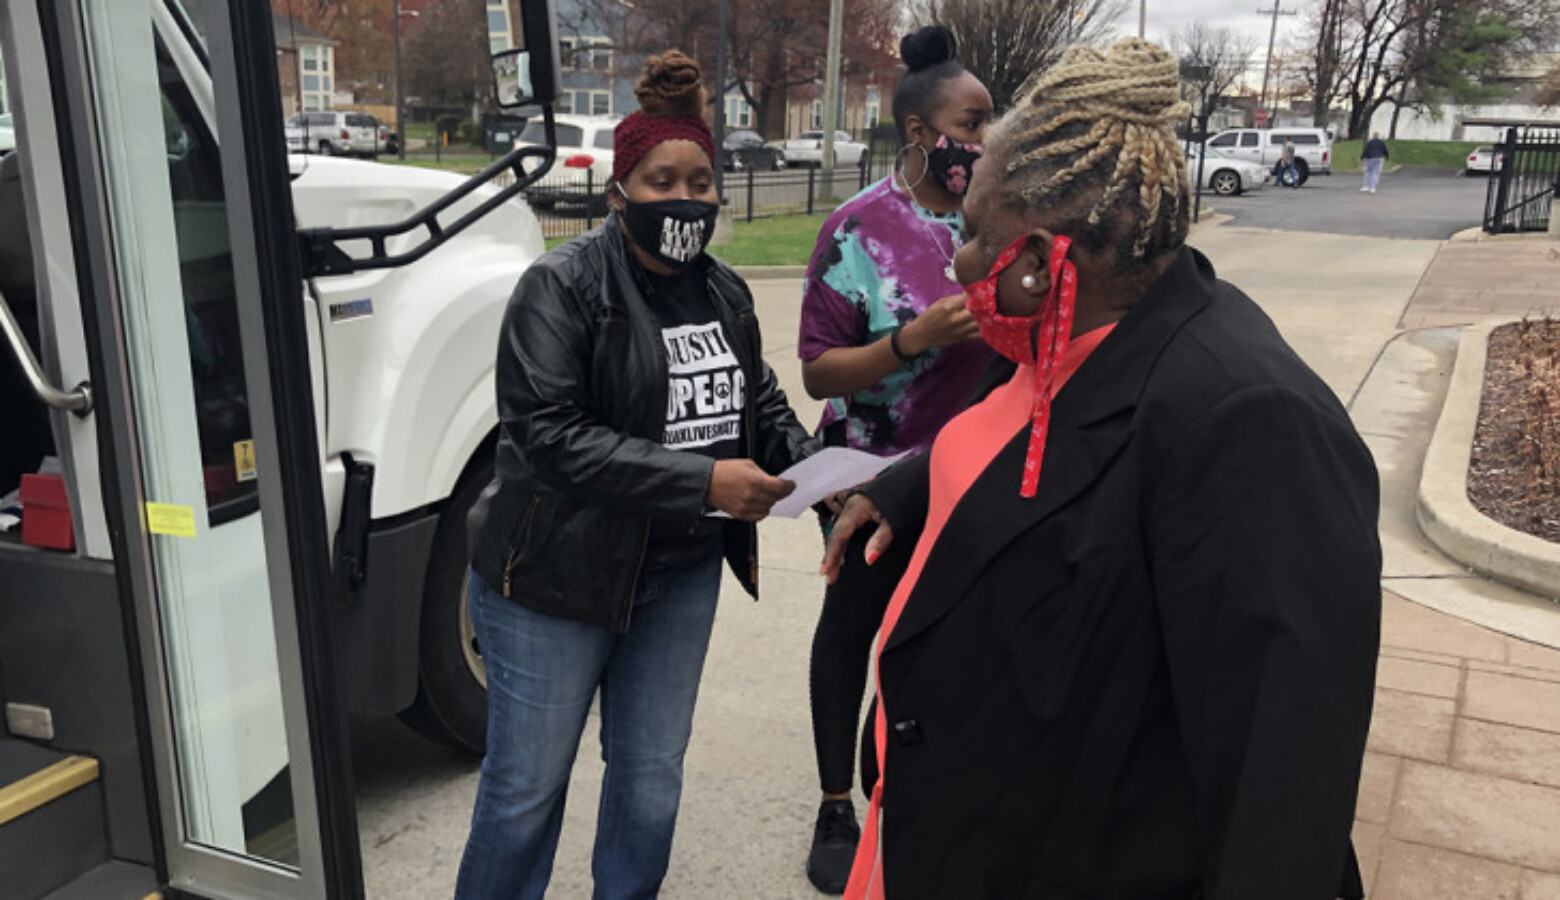 Harriett Rankin, a member of Black Lives Matter Louisville, helps residents board a van to get their second dose of the COVID-19 vaccine.